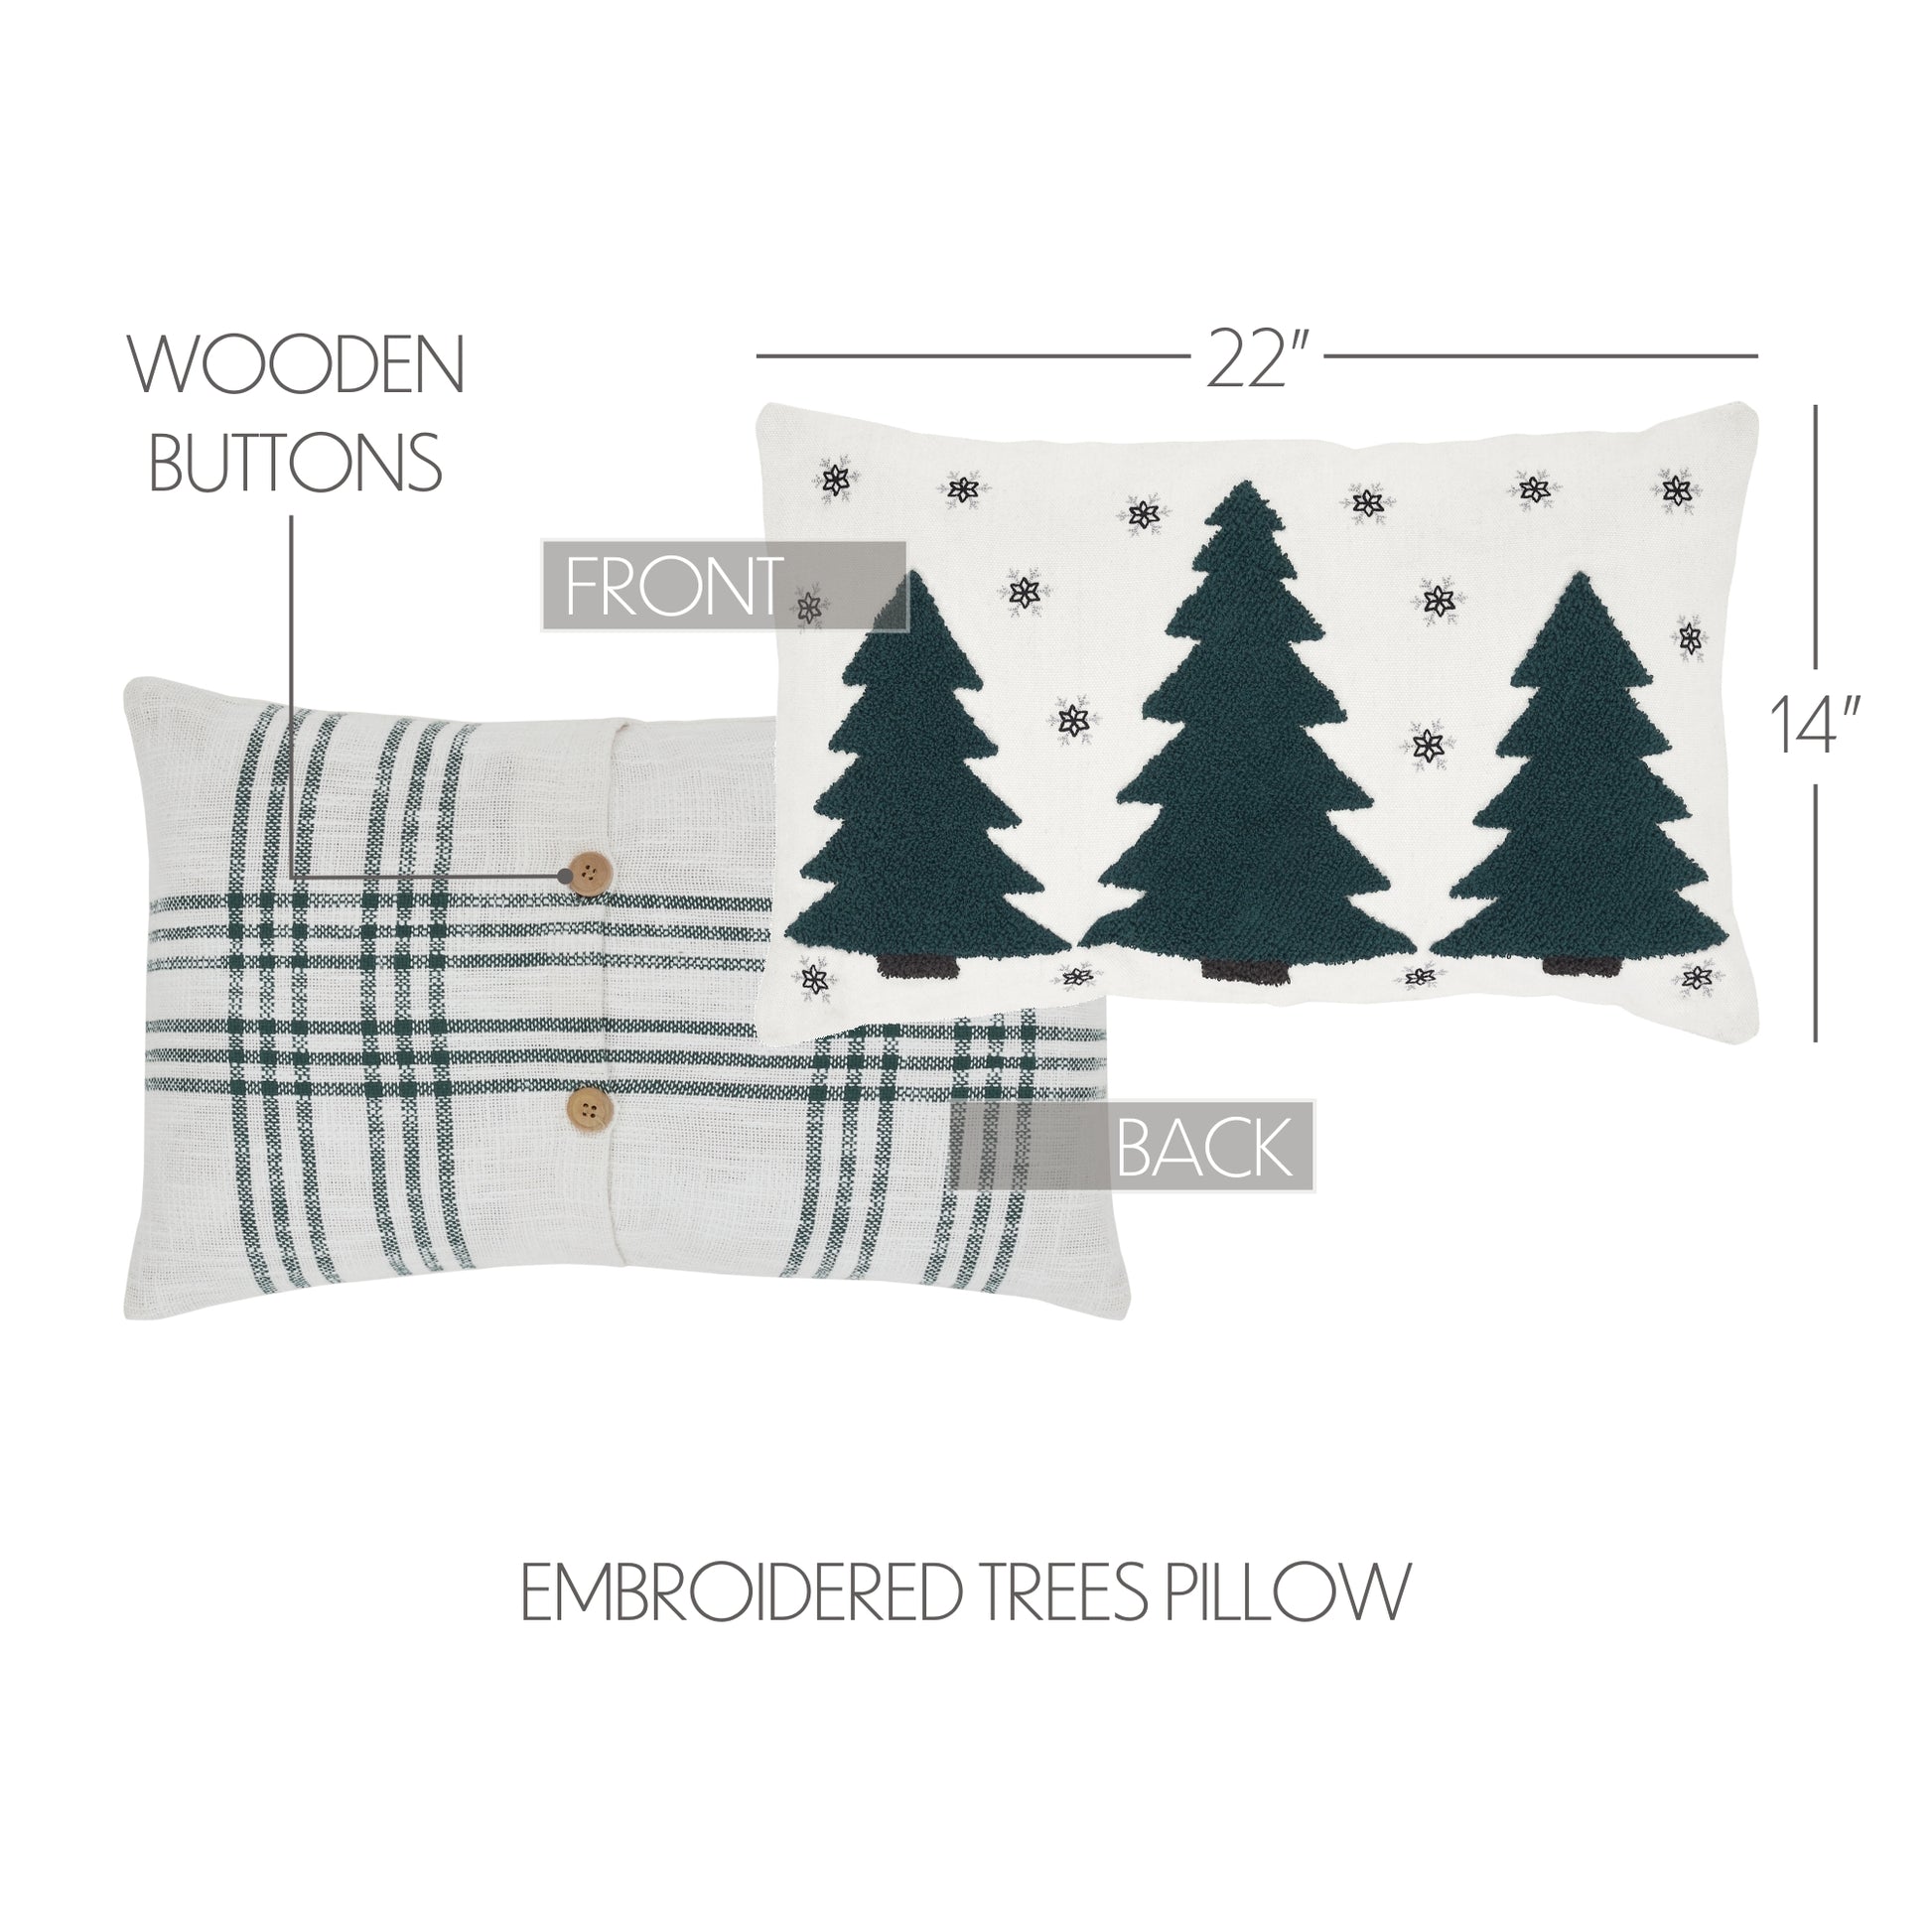 80424-Pine-Grove-Plaid-Embroidered-Trees-Pillow-14x22-image-1